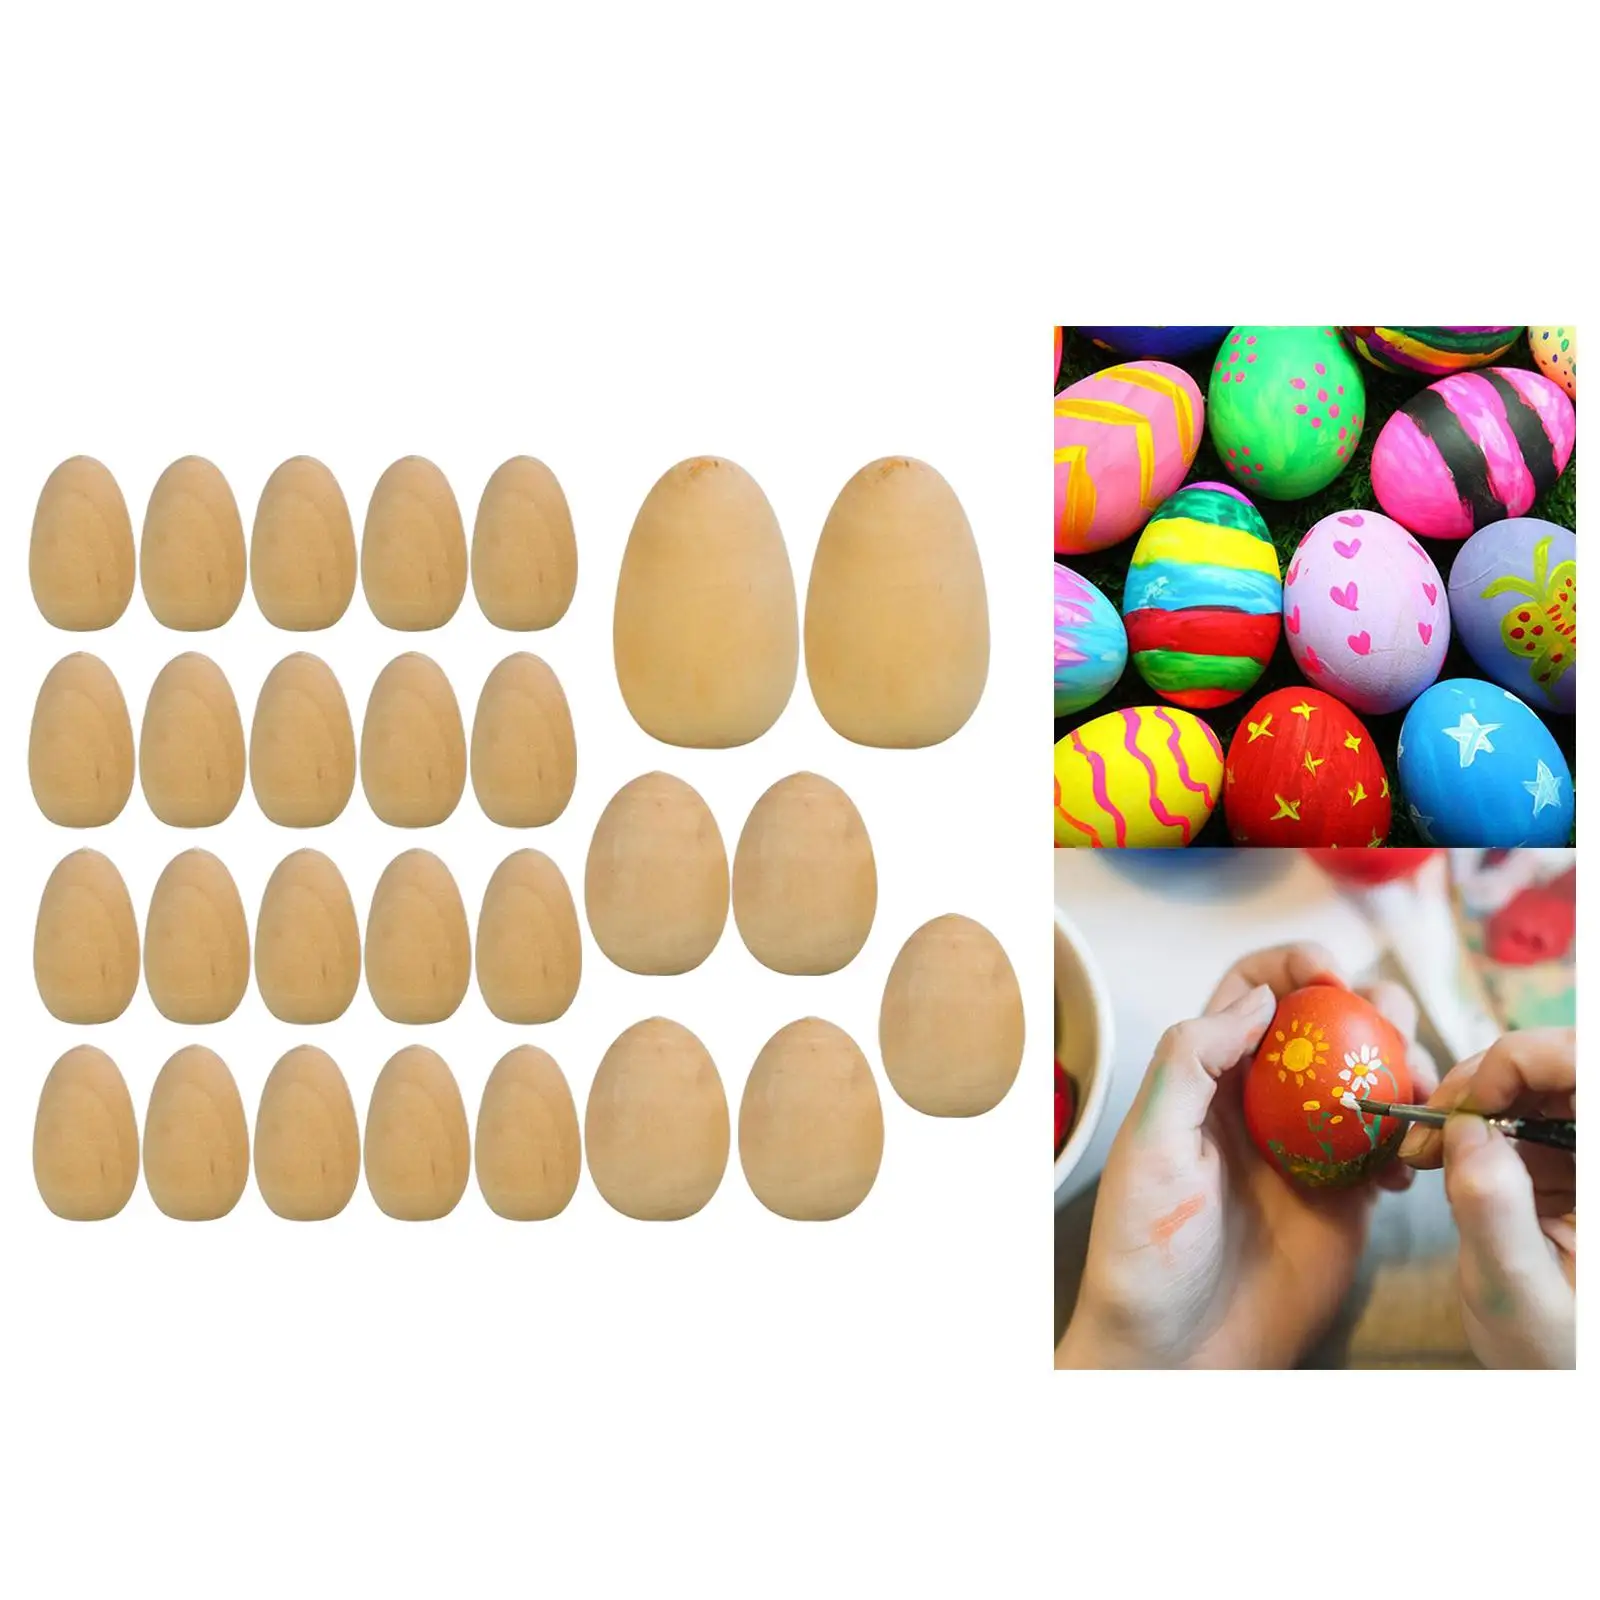 27x Smooth Wooden Blank Eggs Manual Graffiti Unfinished Wood Eggs with Flat Bottom for DIY Easter Holiday Craft Decor images - 1